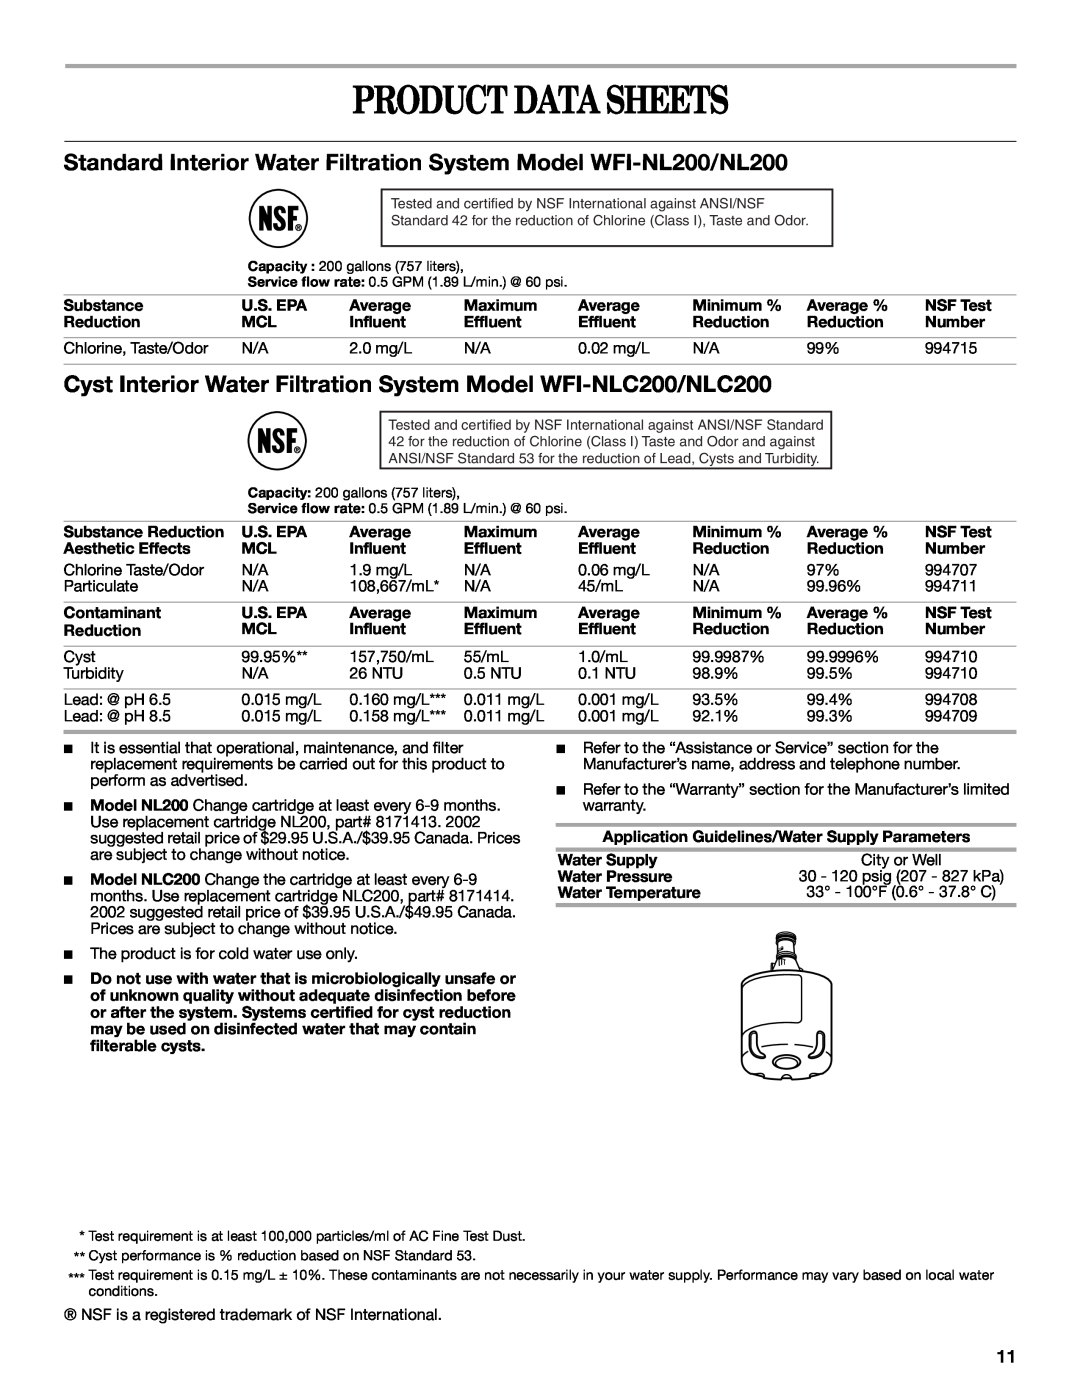 Whirlpool GR2SHTXKS02 Product Data Sheets, Standard Interior Water Filtration System Model WFI-NL200/NL200, Substance 